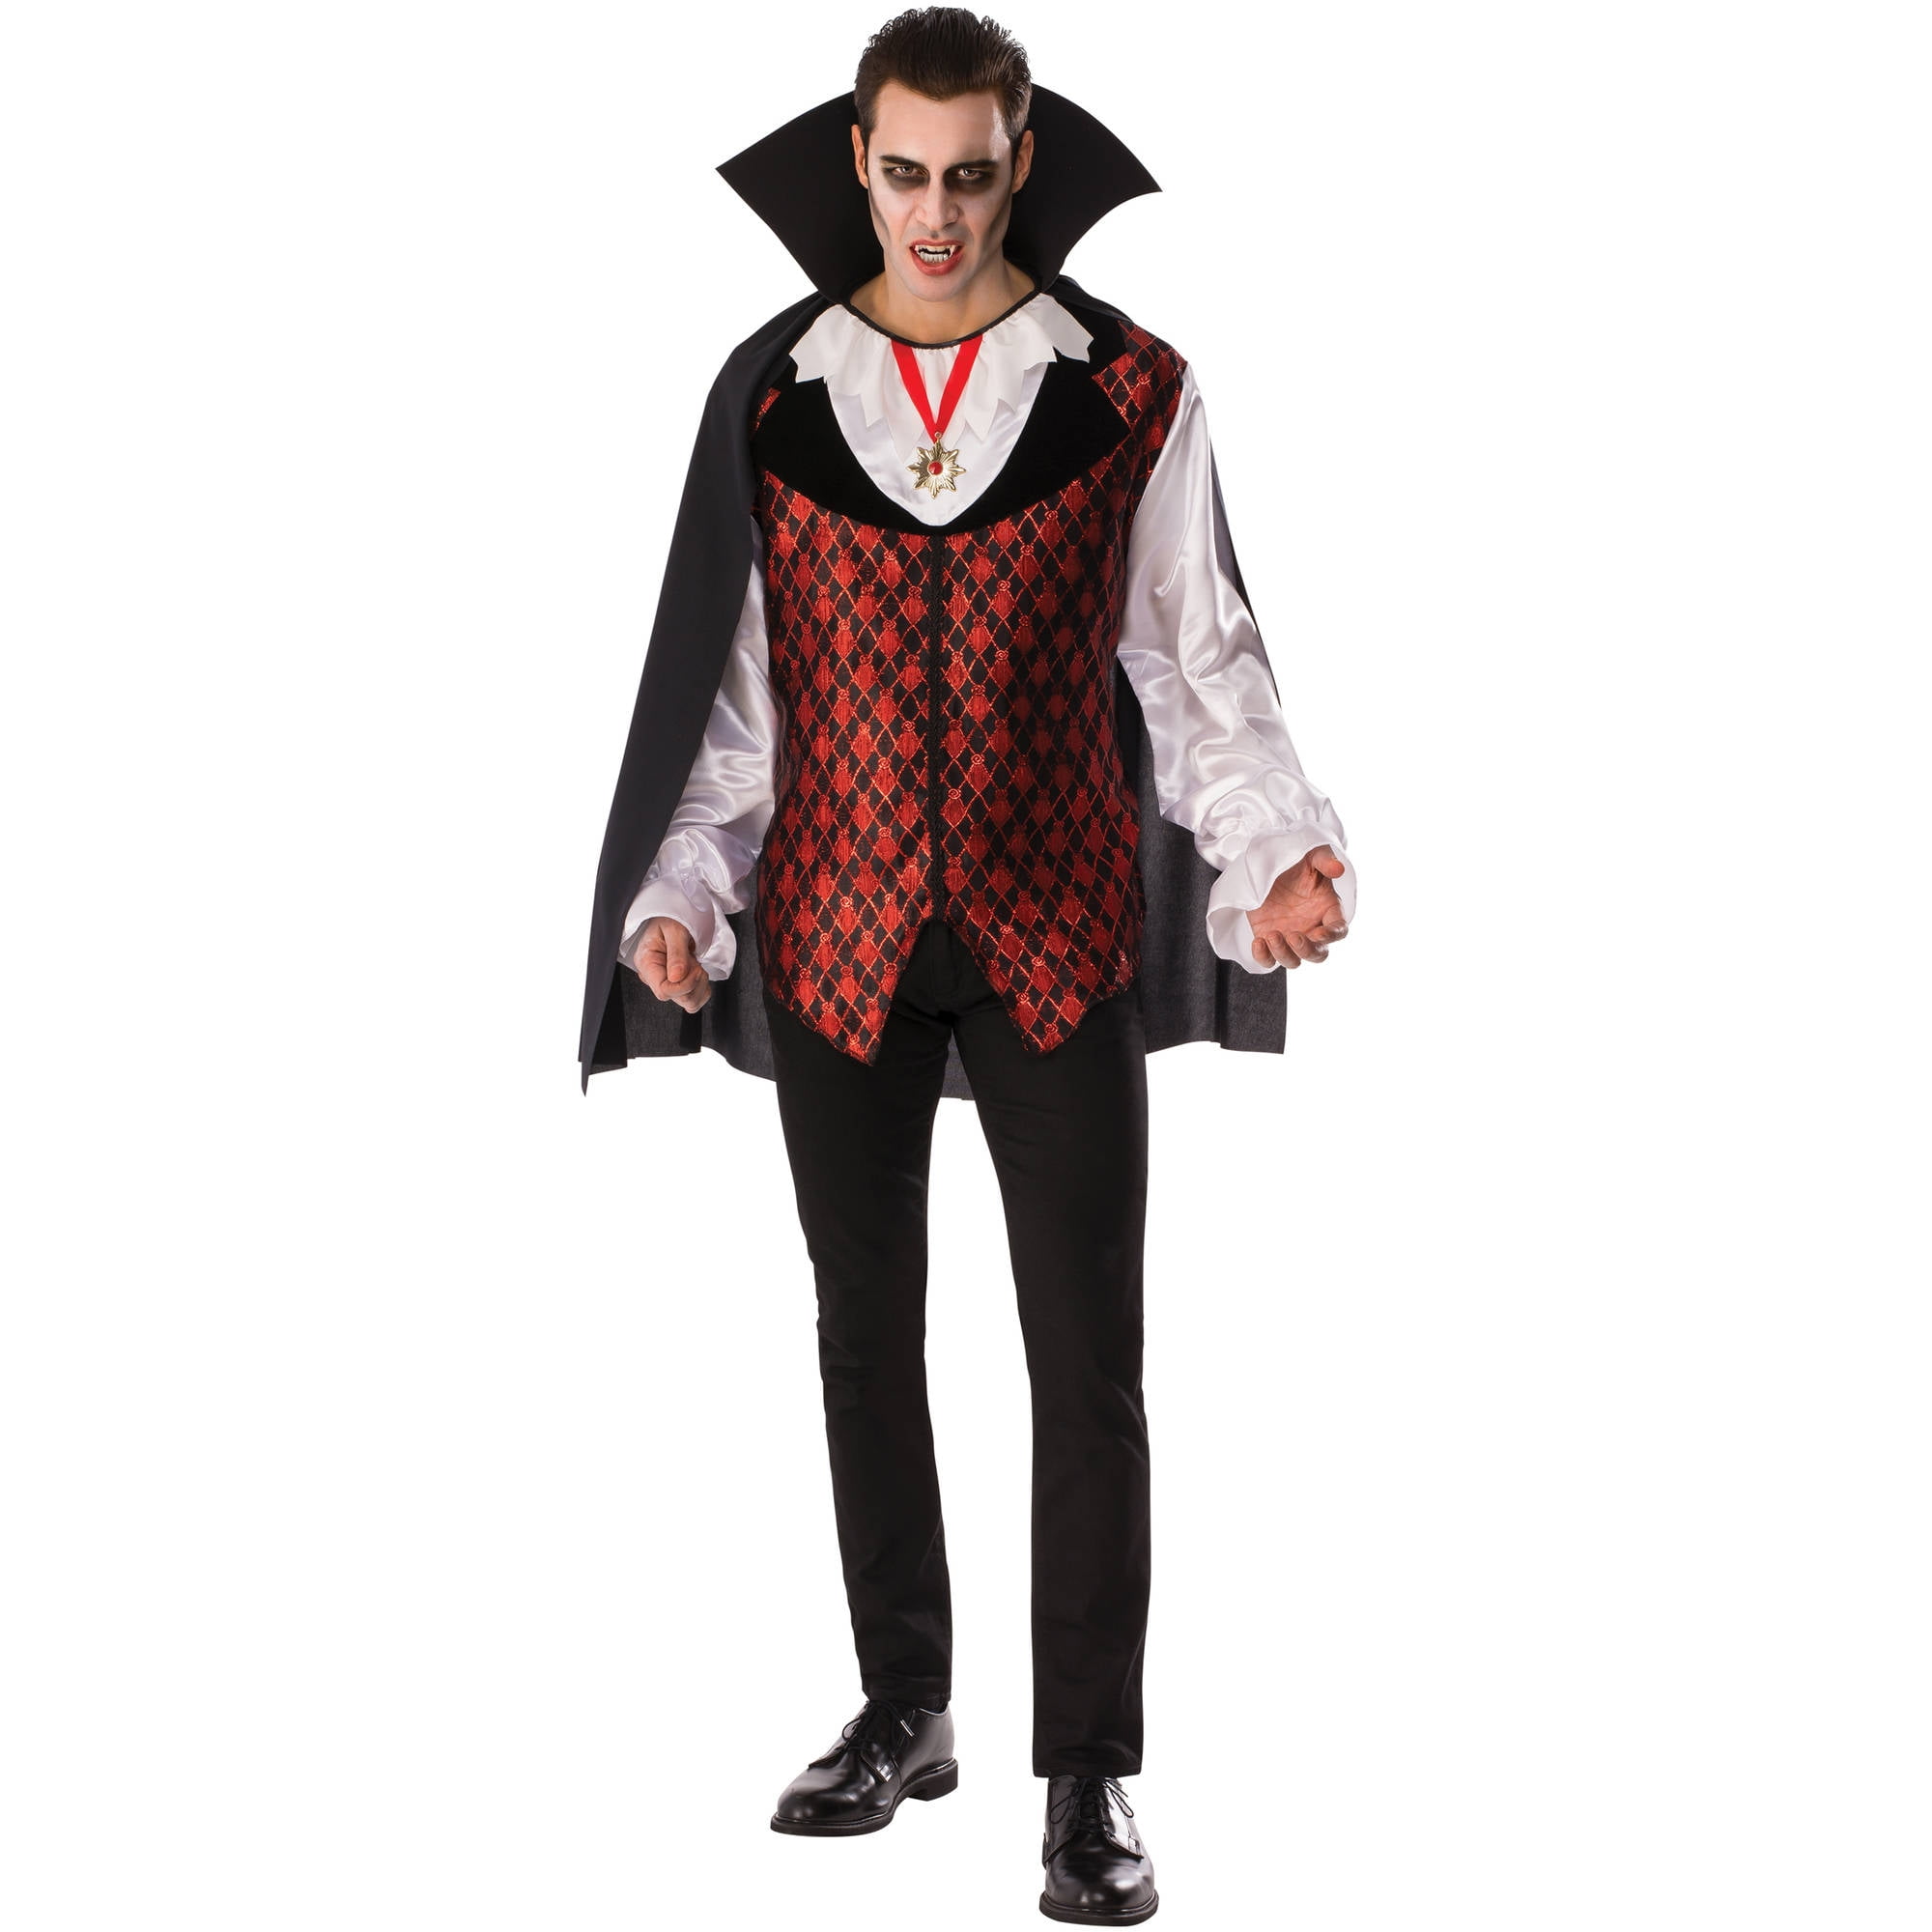 How to be a vampire for halloween costume | ann's blog